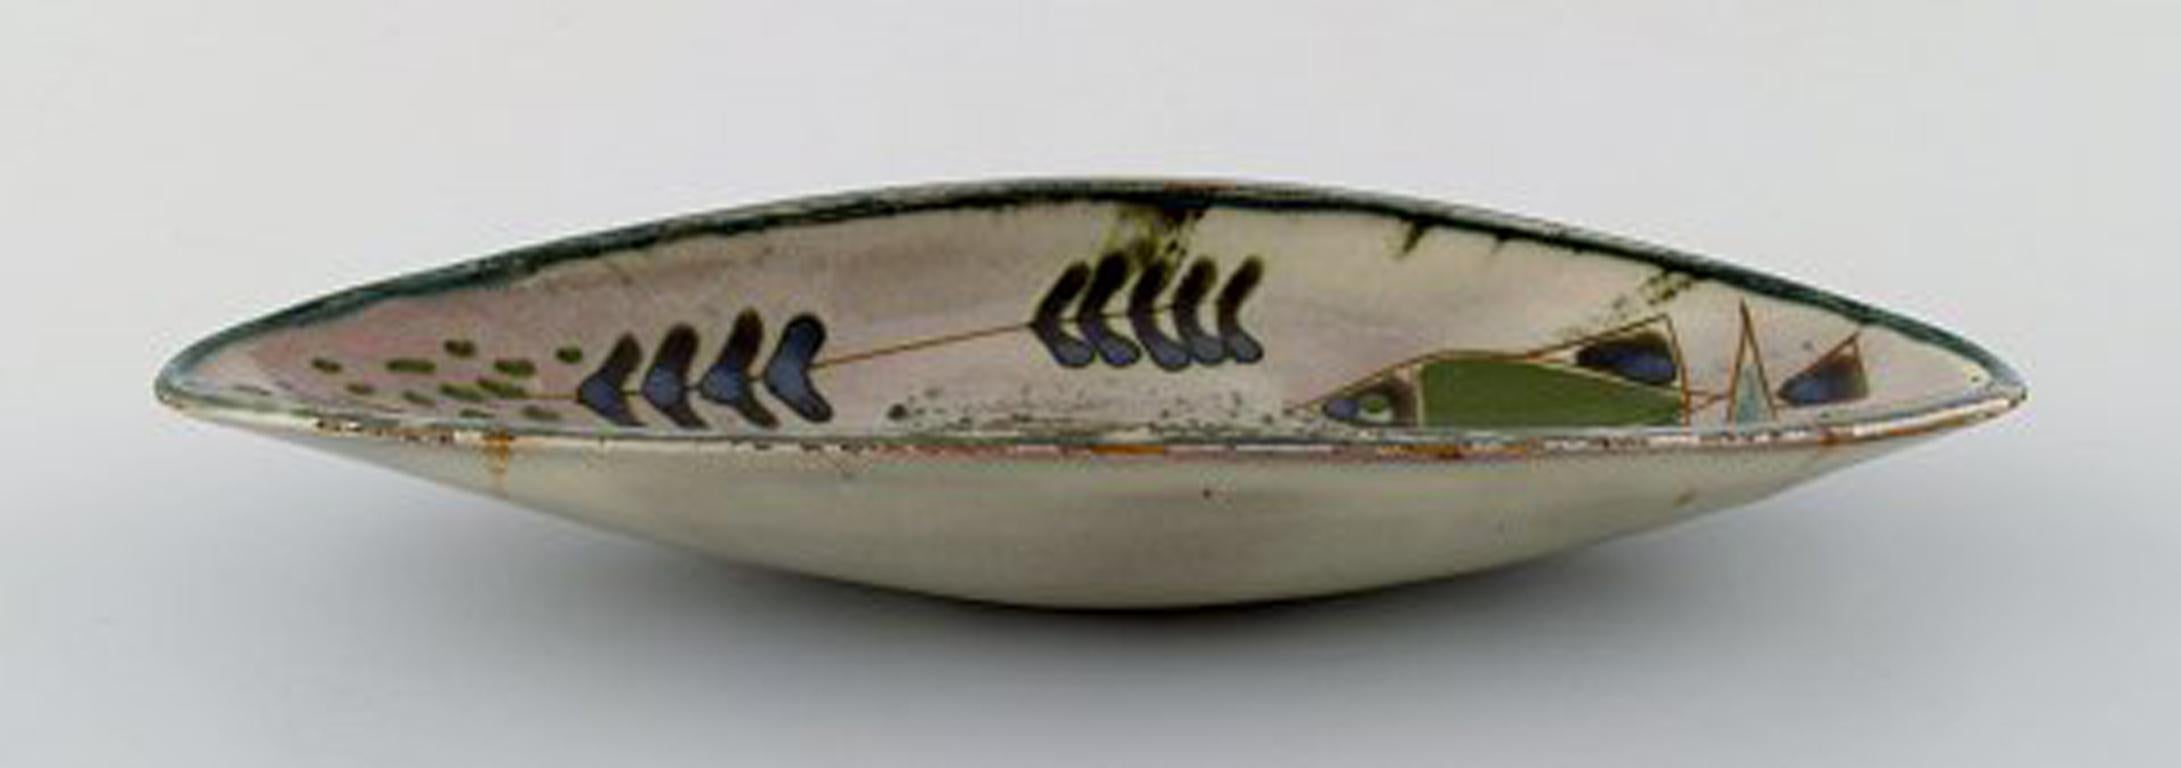 Astrid Tjalk for Kähler: Oblong unique dish in pottery.
Decorated with fish motifs in green, yellow, black and maroon.
1960s.
Signed Astrid. Produced by Kähler.
Measures: 23 cm. x 8 cm. height: 3 cm.
In good condition.